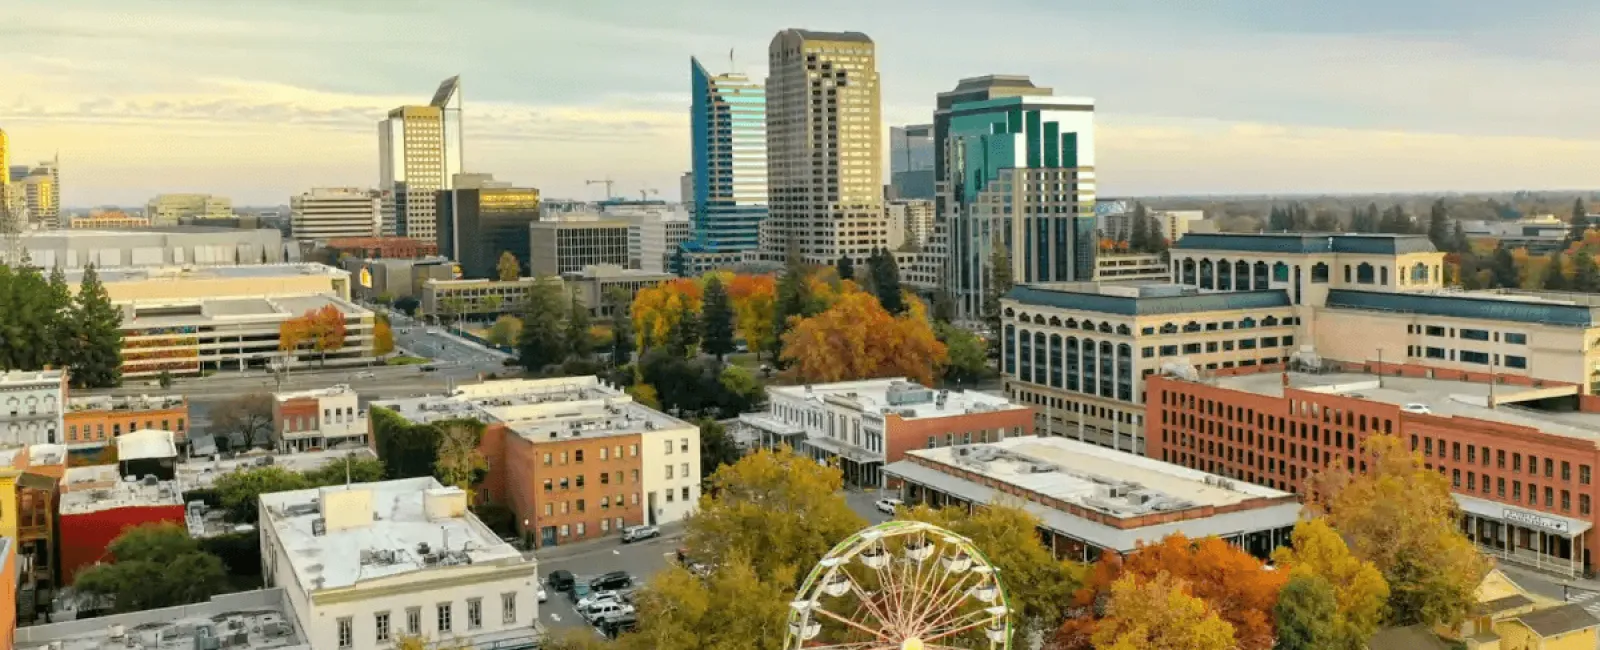 The 5 Top Sacramento Tech Companies You Should Know About